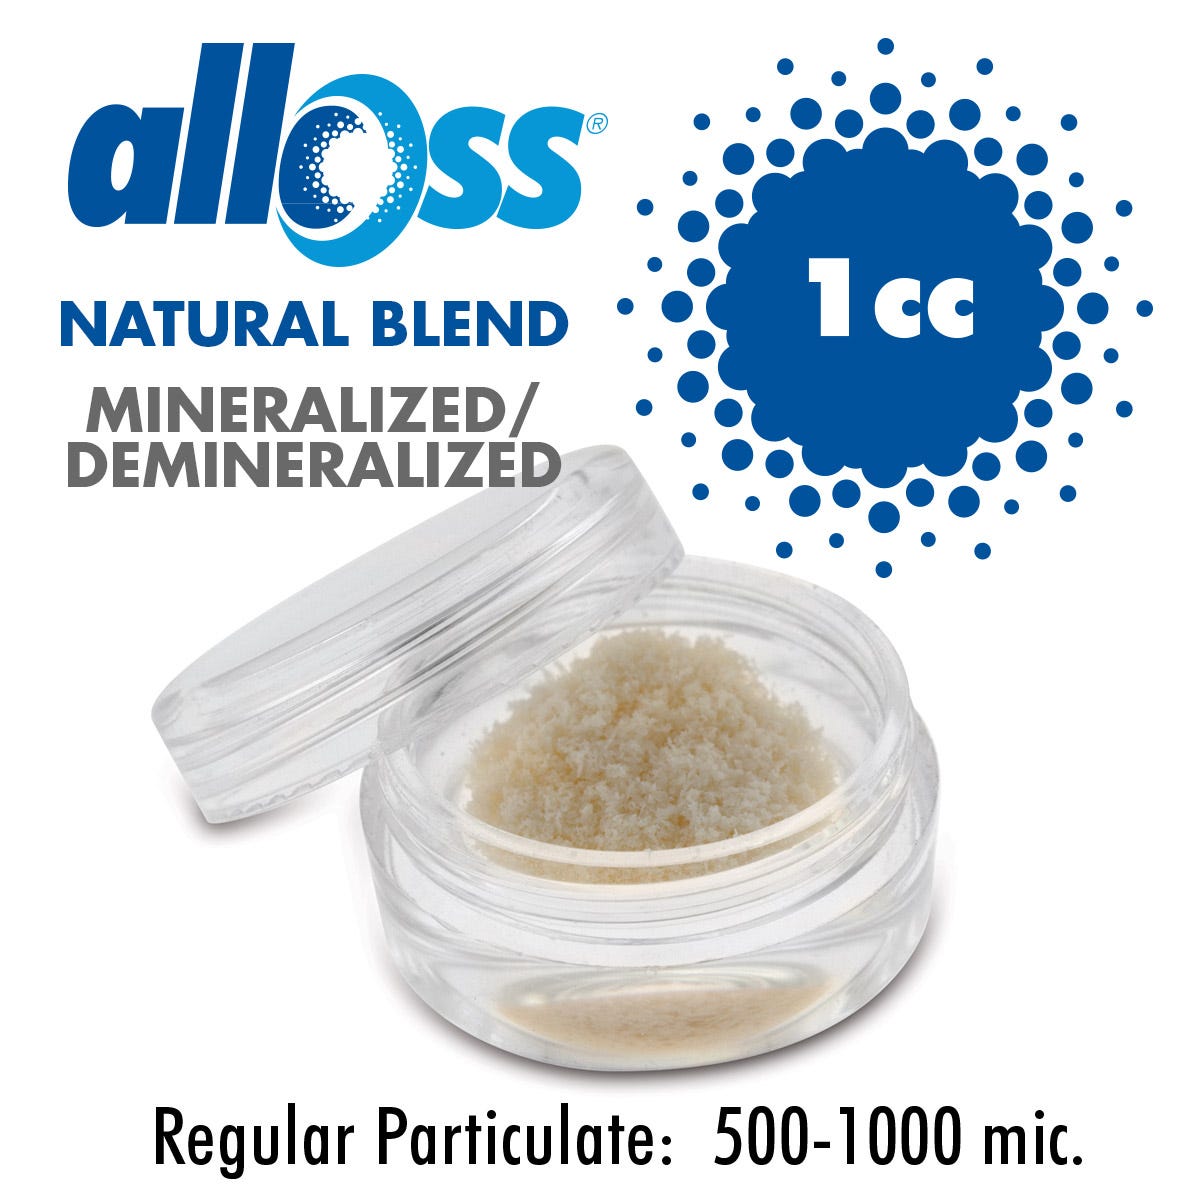 alloOss® Natural Blend Mineralized/Demineralized Particulate 500-1000um (1.0cc)